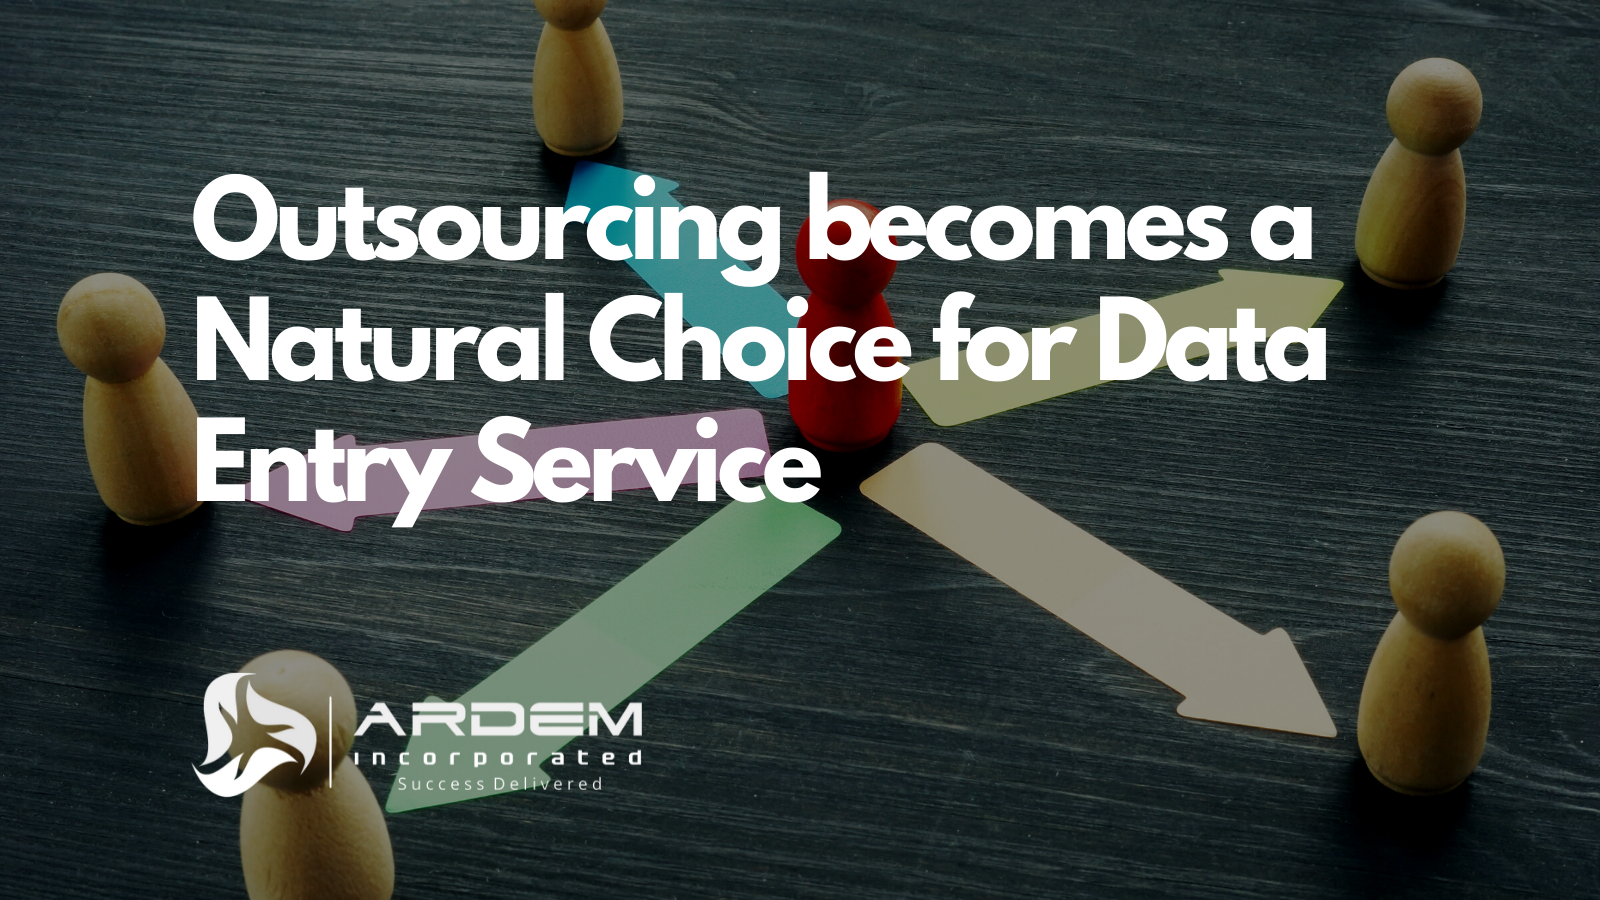 Outsourcing becomes a Natural Choice for Data Entry Service Data Entry Service Outsourcing